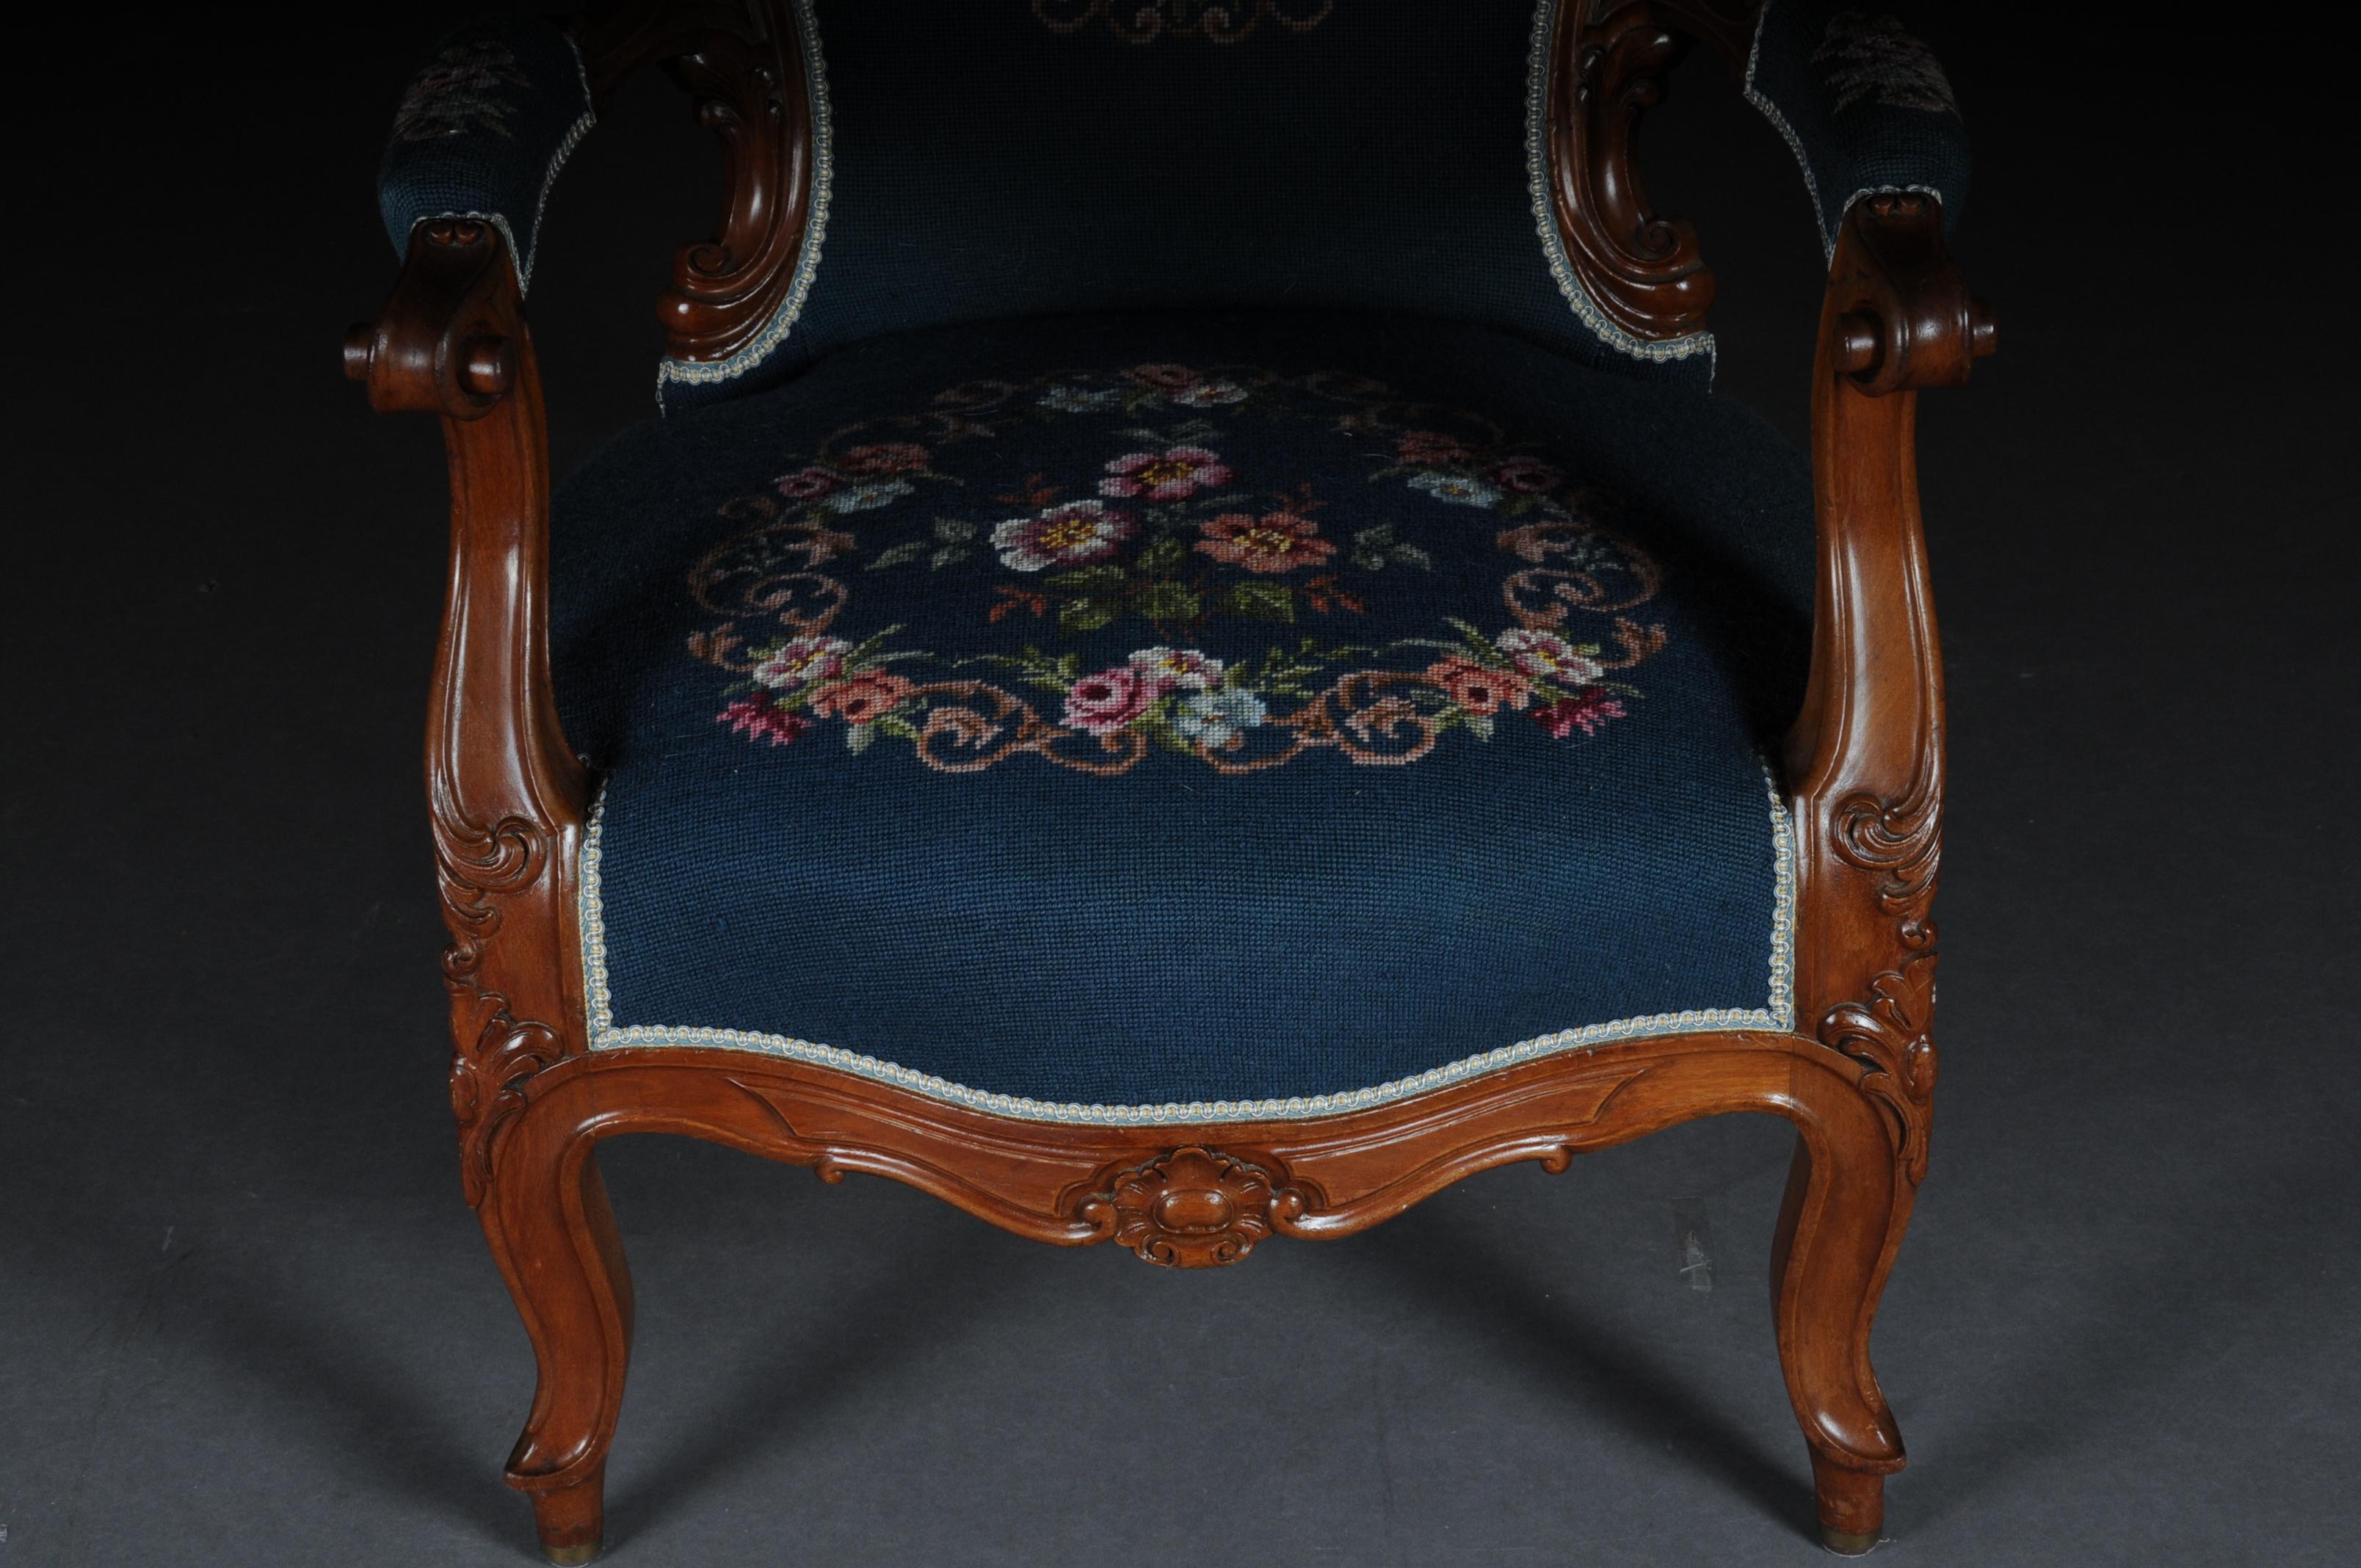 Solid mahogany body.
Richly carved and curly. Classic upholstery upholstered in a blue, embroidered fabric.

(B-147).
 